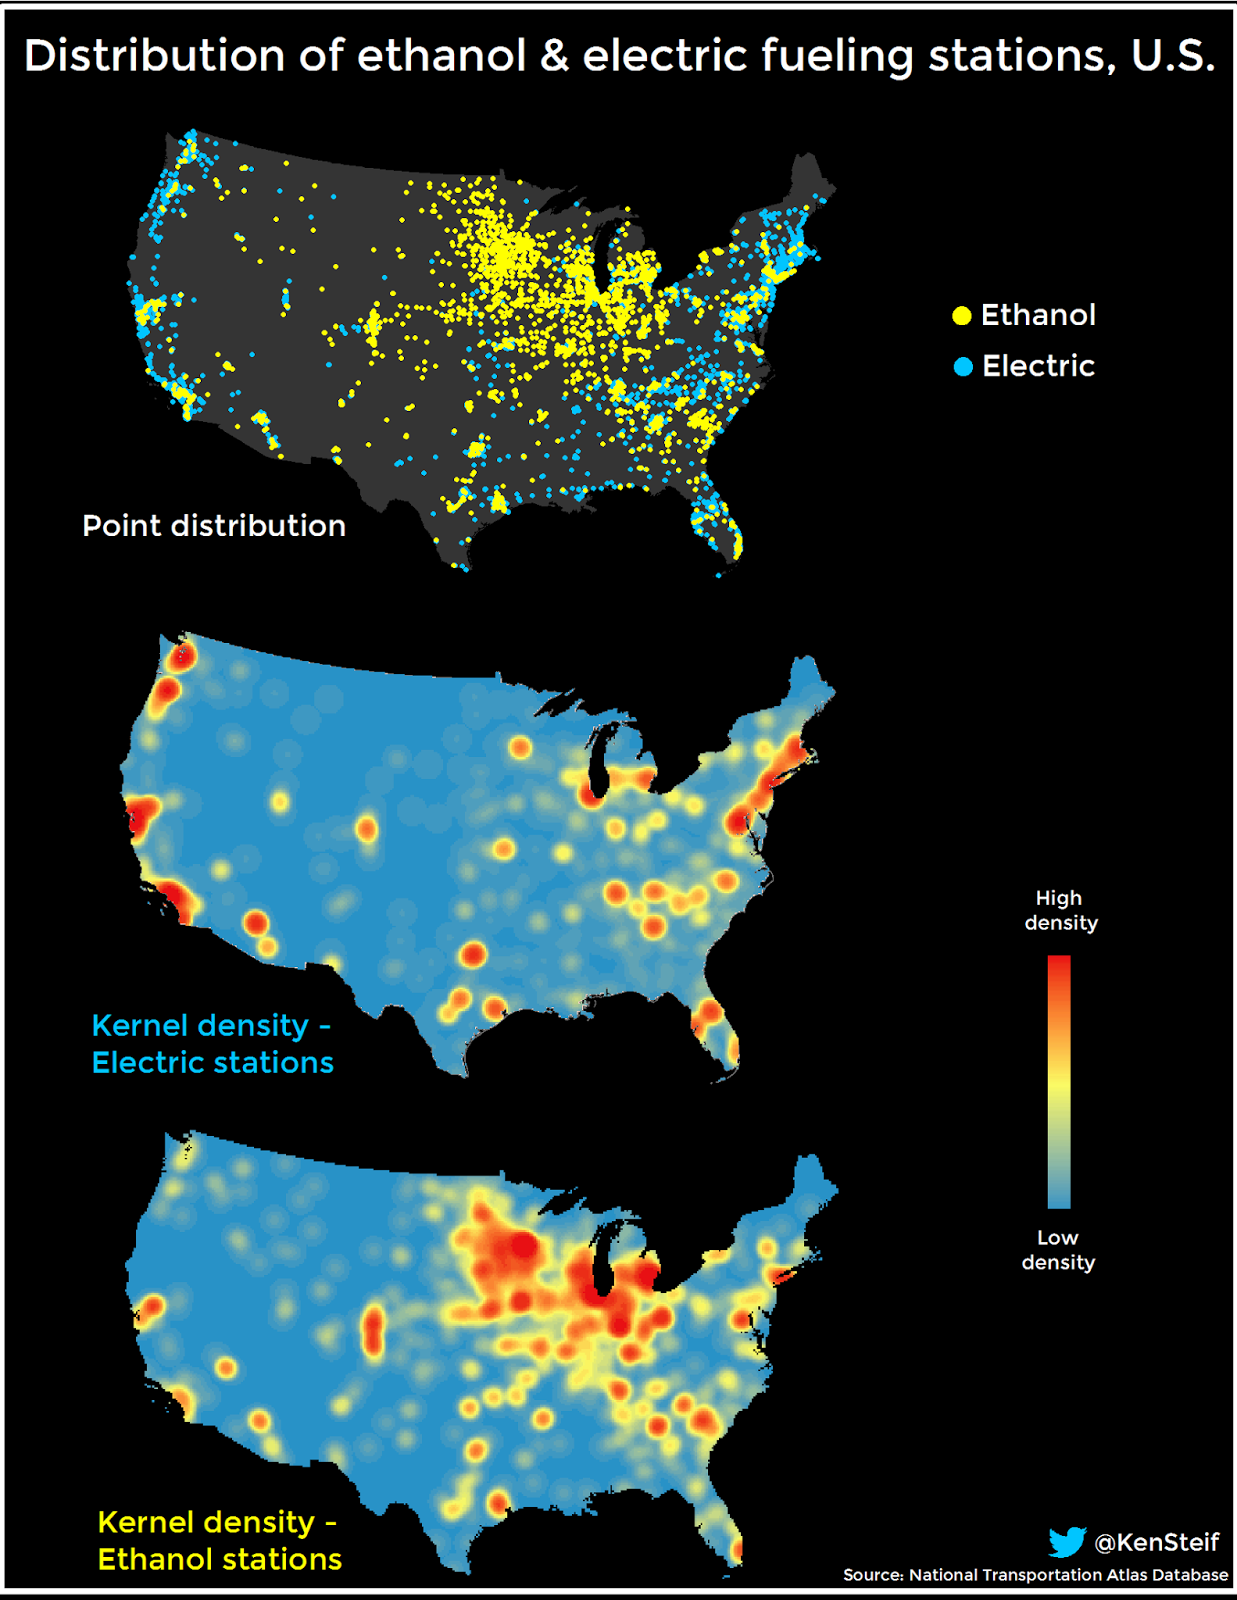 Distribution of electric and ethanol fuel stations in the United States